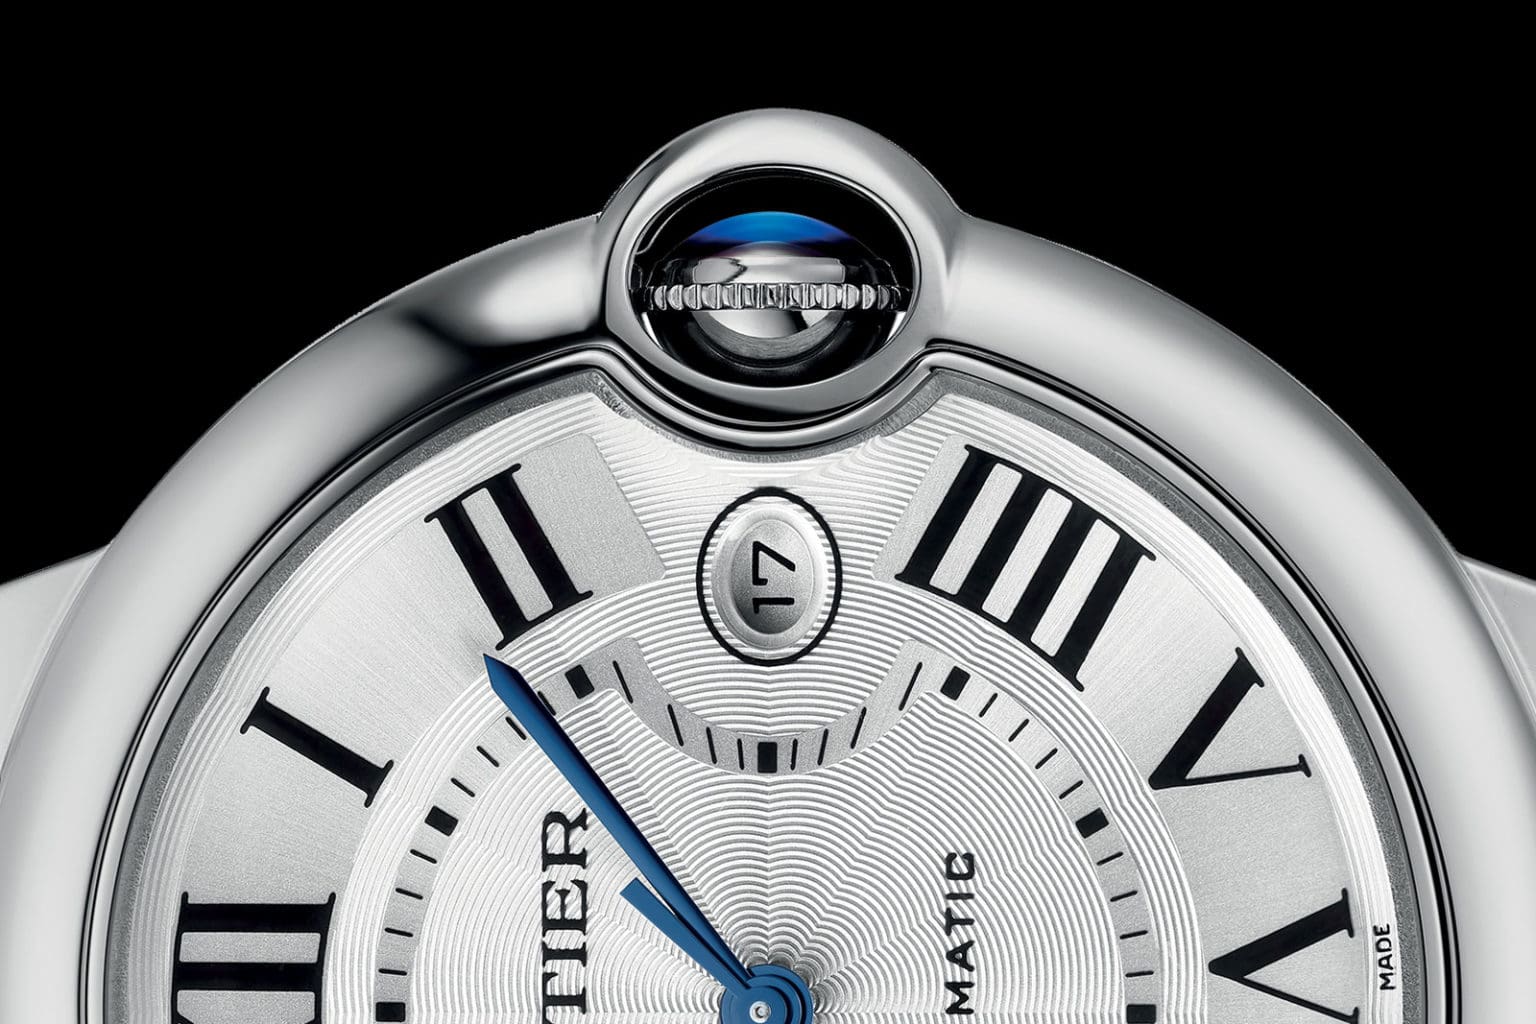 The new and improved Cartier Ballon Bleu deserves to blow up